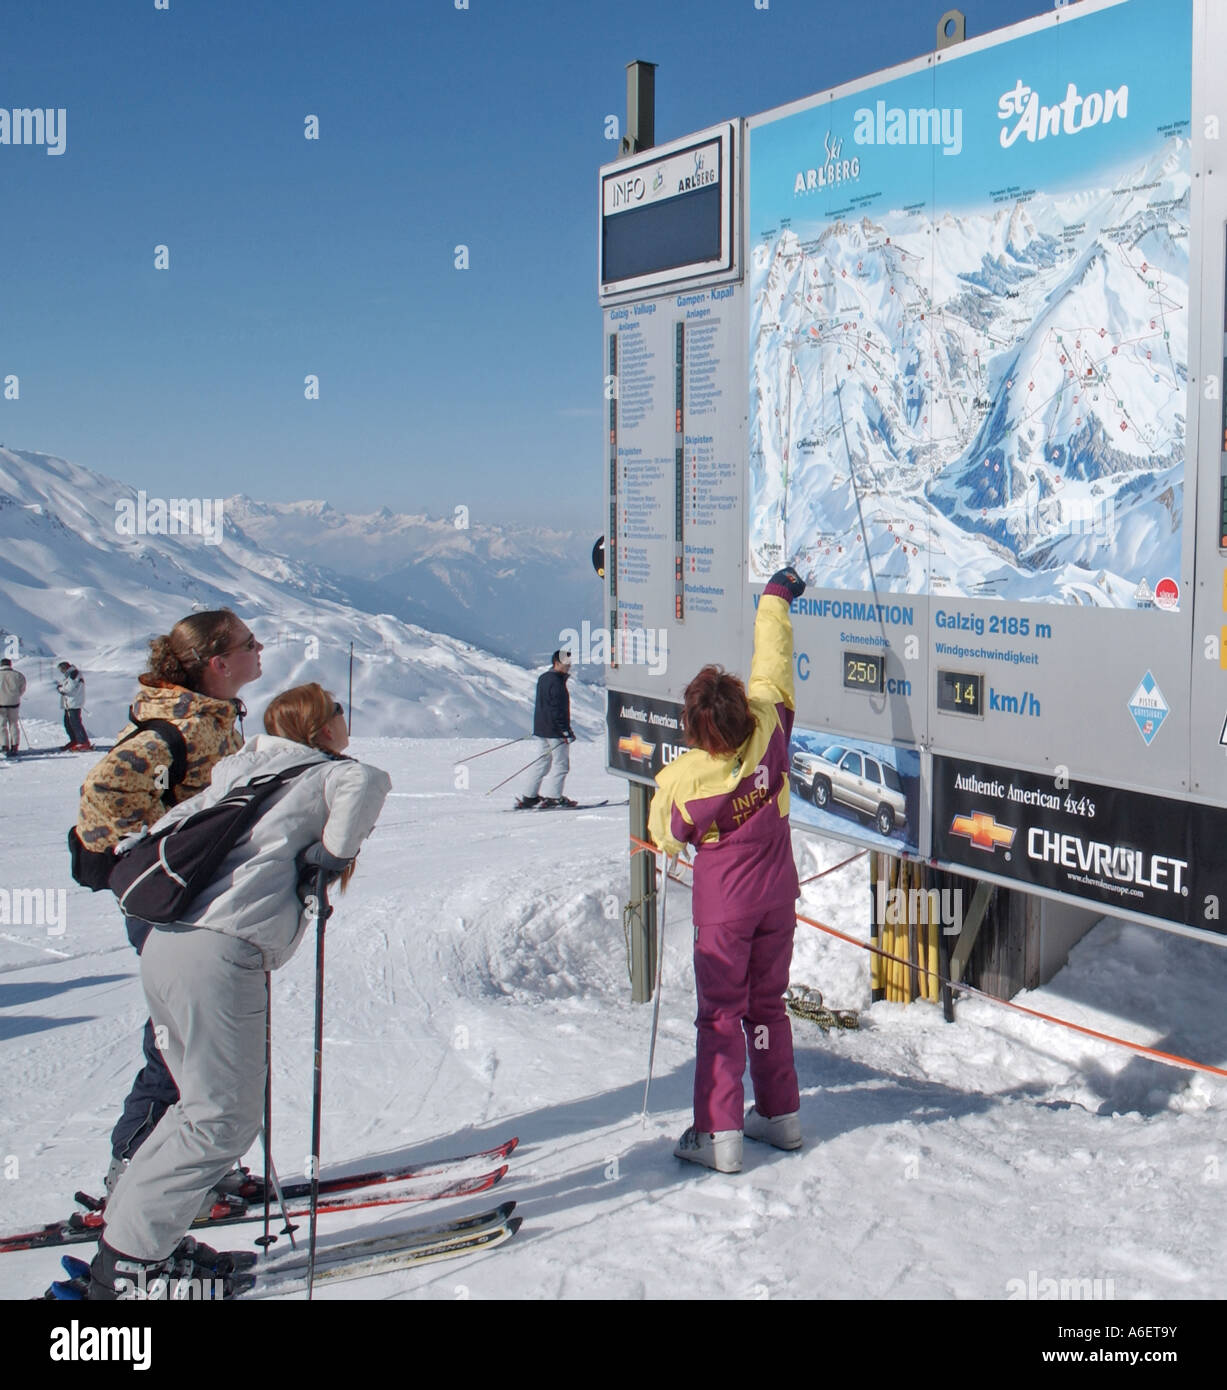 St anton austria ski hi-res stock photography and images - Page 9 - Alamy